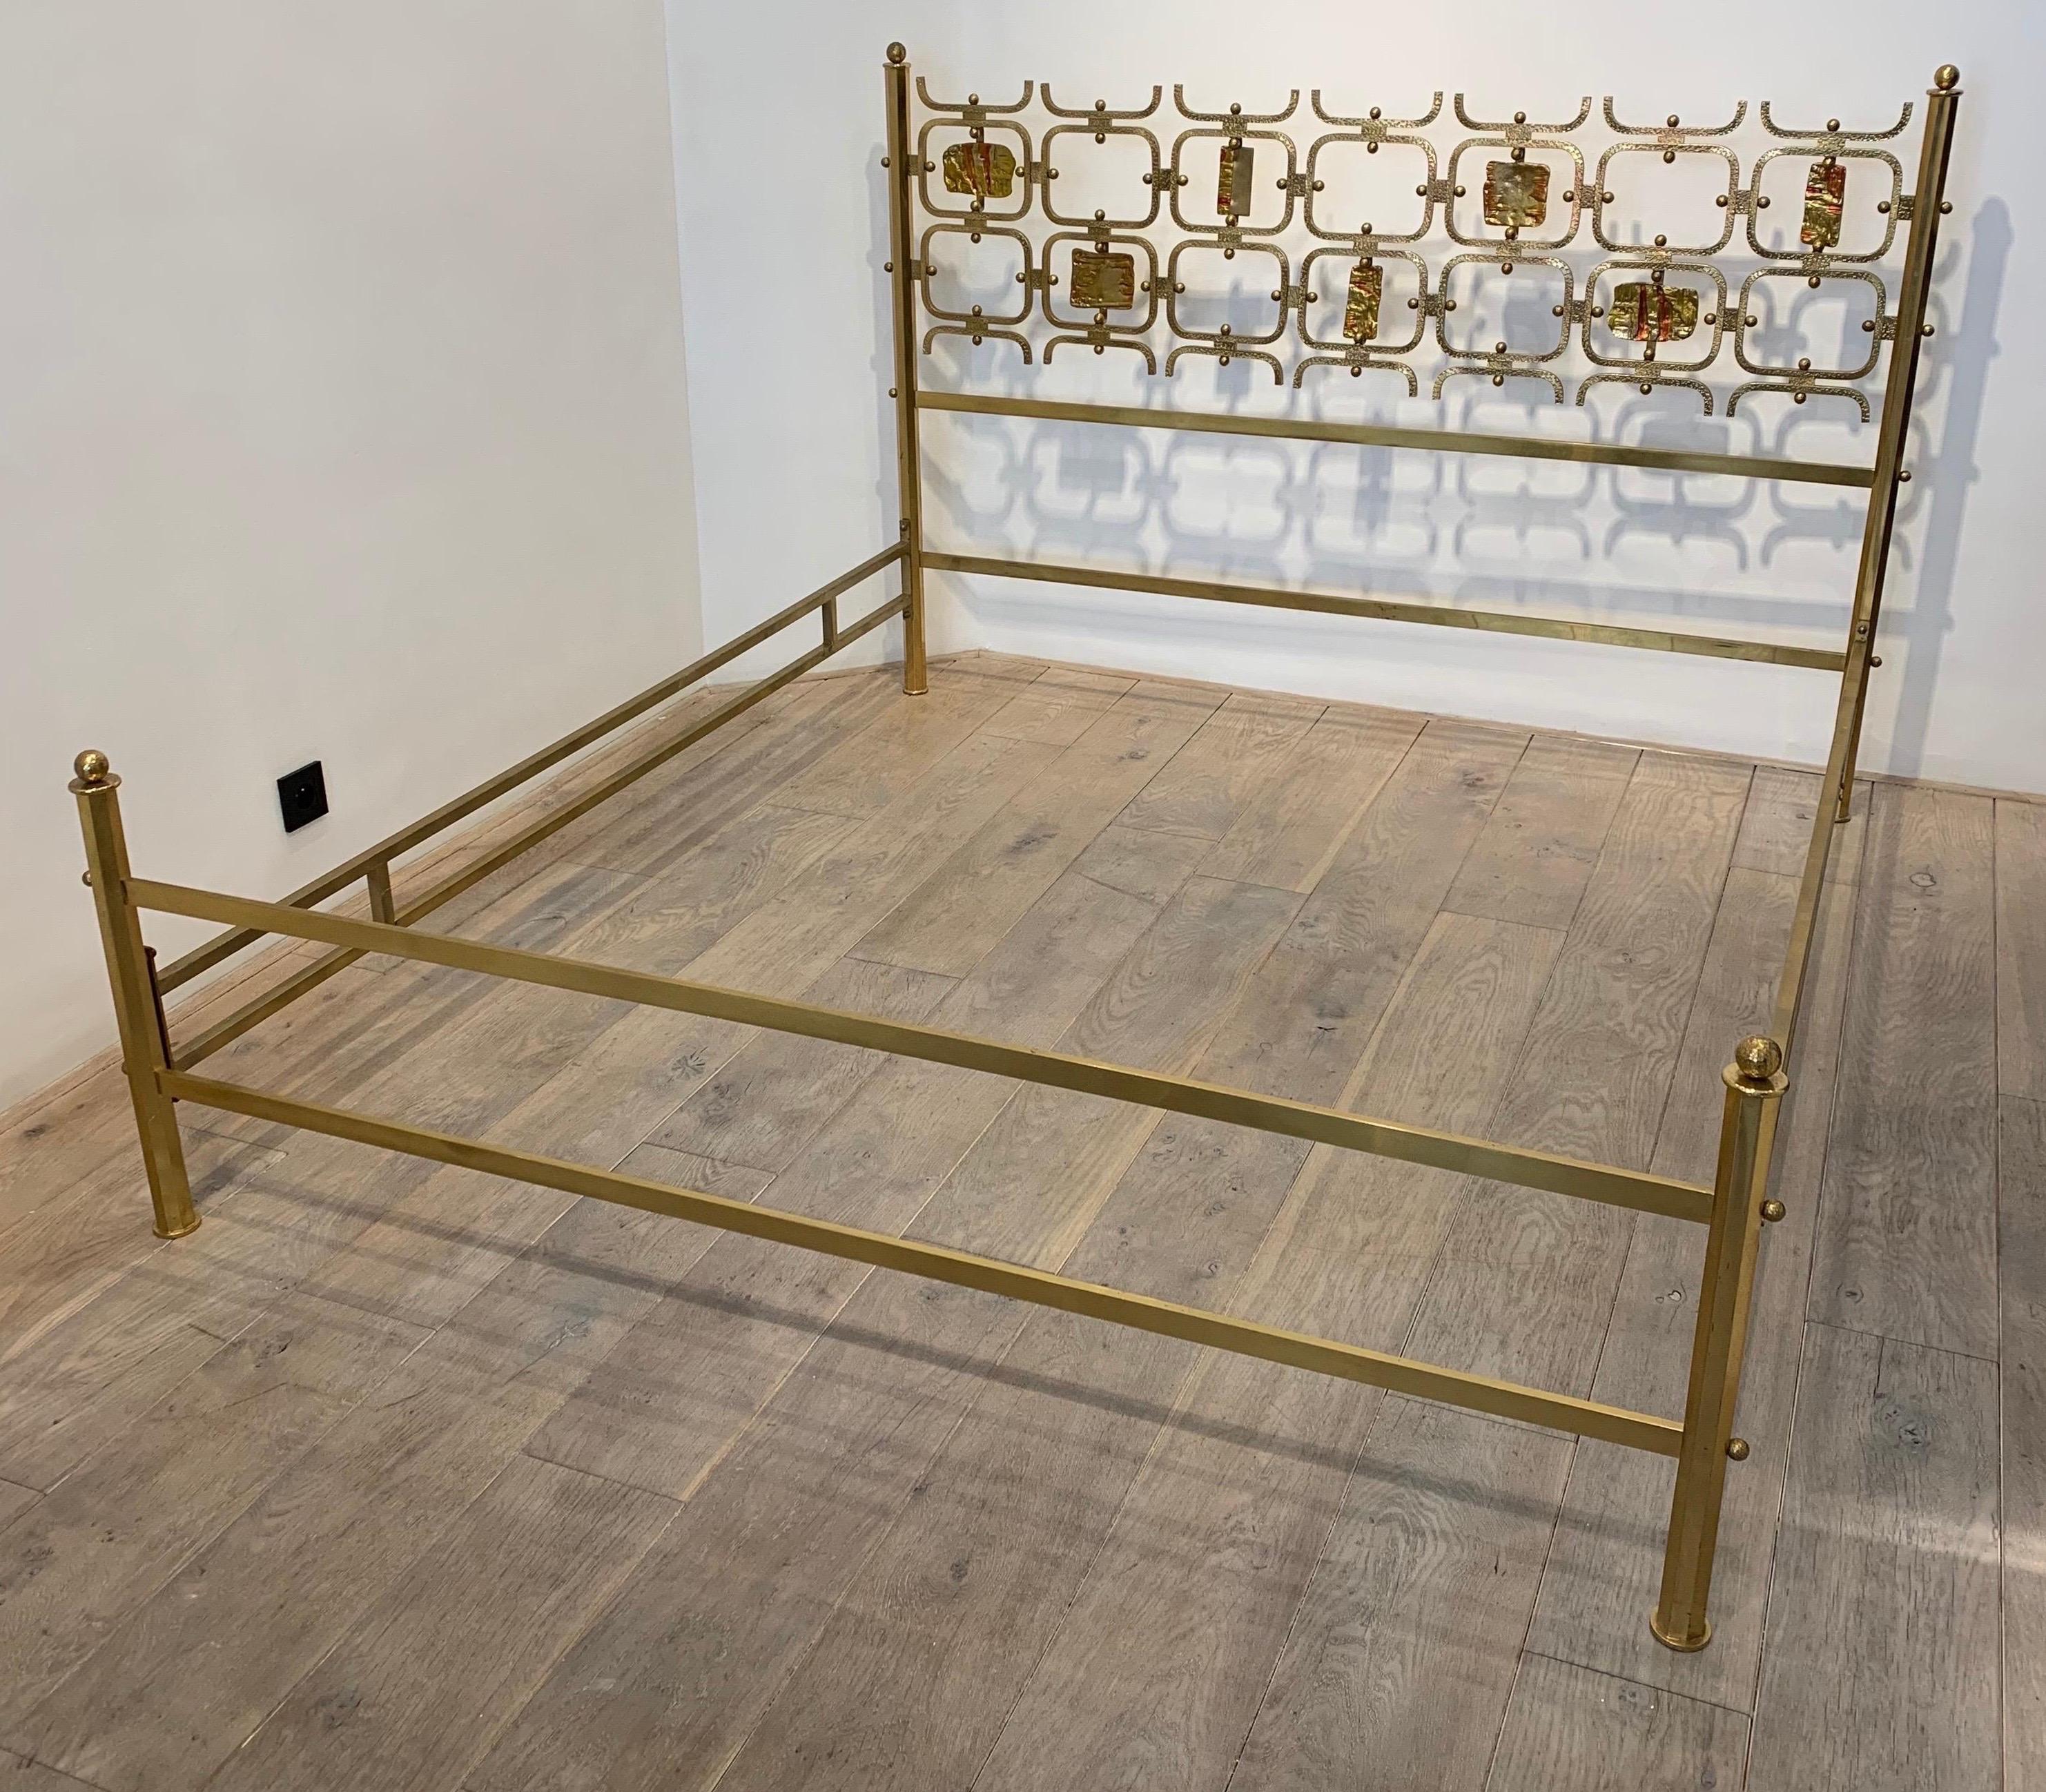 The bed is a collaborative work of the designer Osvaldo Borsani and the artist Arnaldo Pomodoro. The bed is made of brass. The headboard is composed of Enameled red brass plates attached onto brass hammered frames fixed by hammered brass spheres.